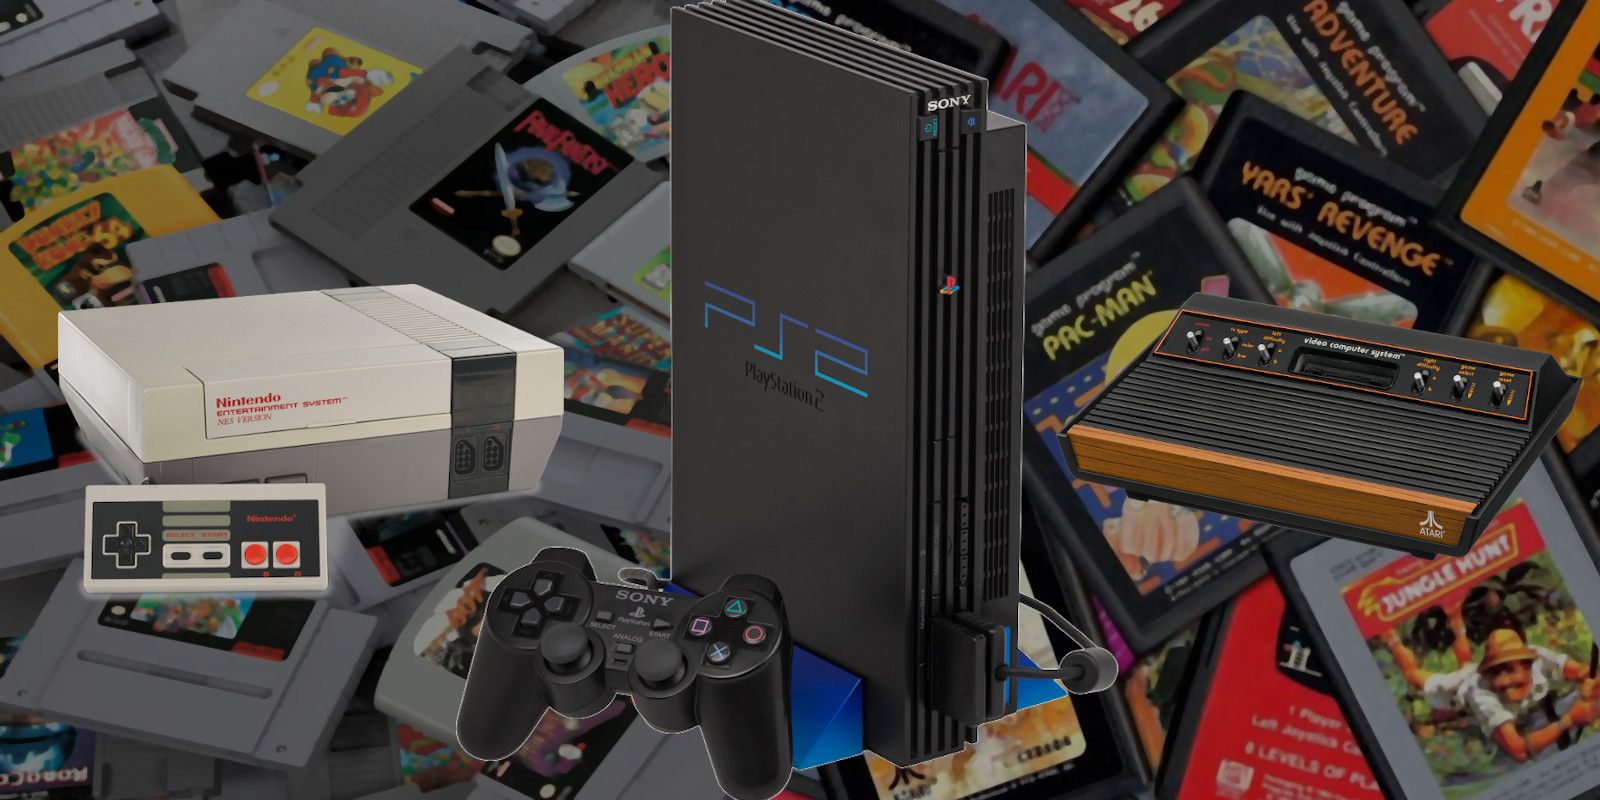 Retro consoles and game cartridges for the SNES, Atari and PlayStation 2